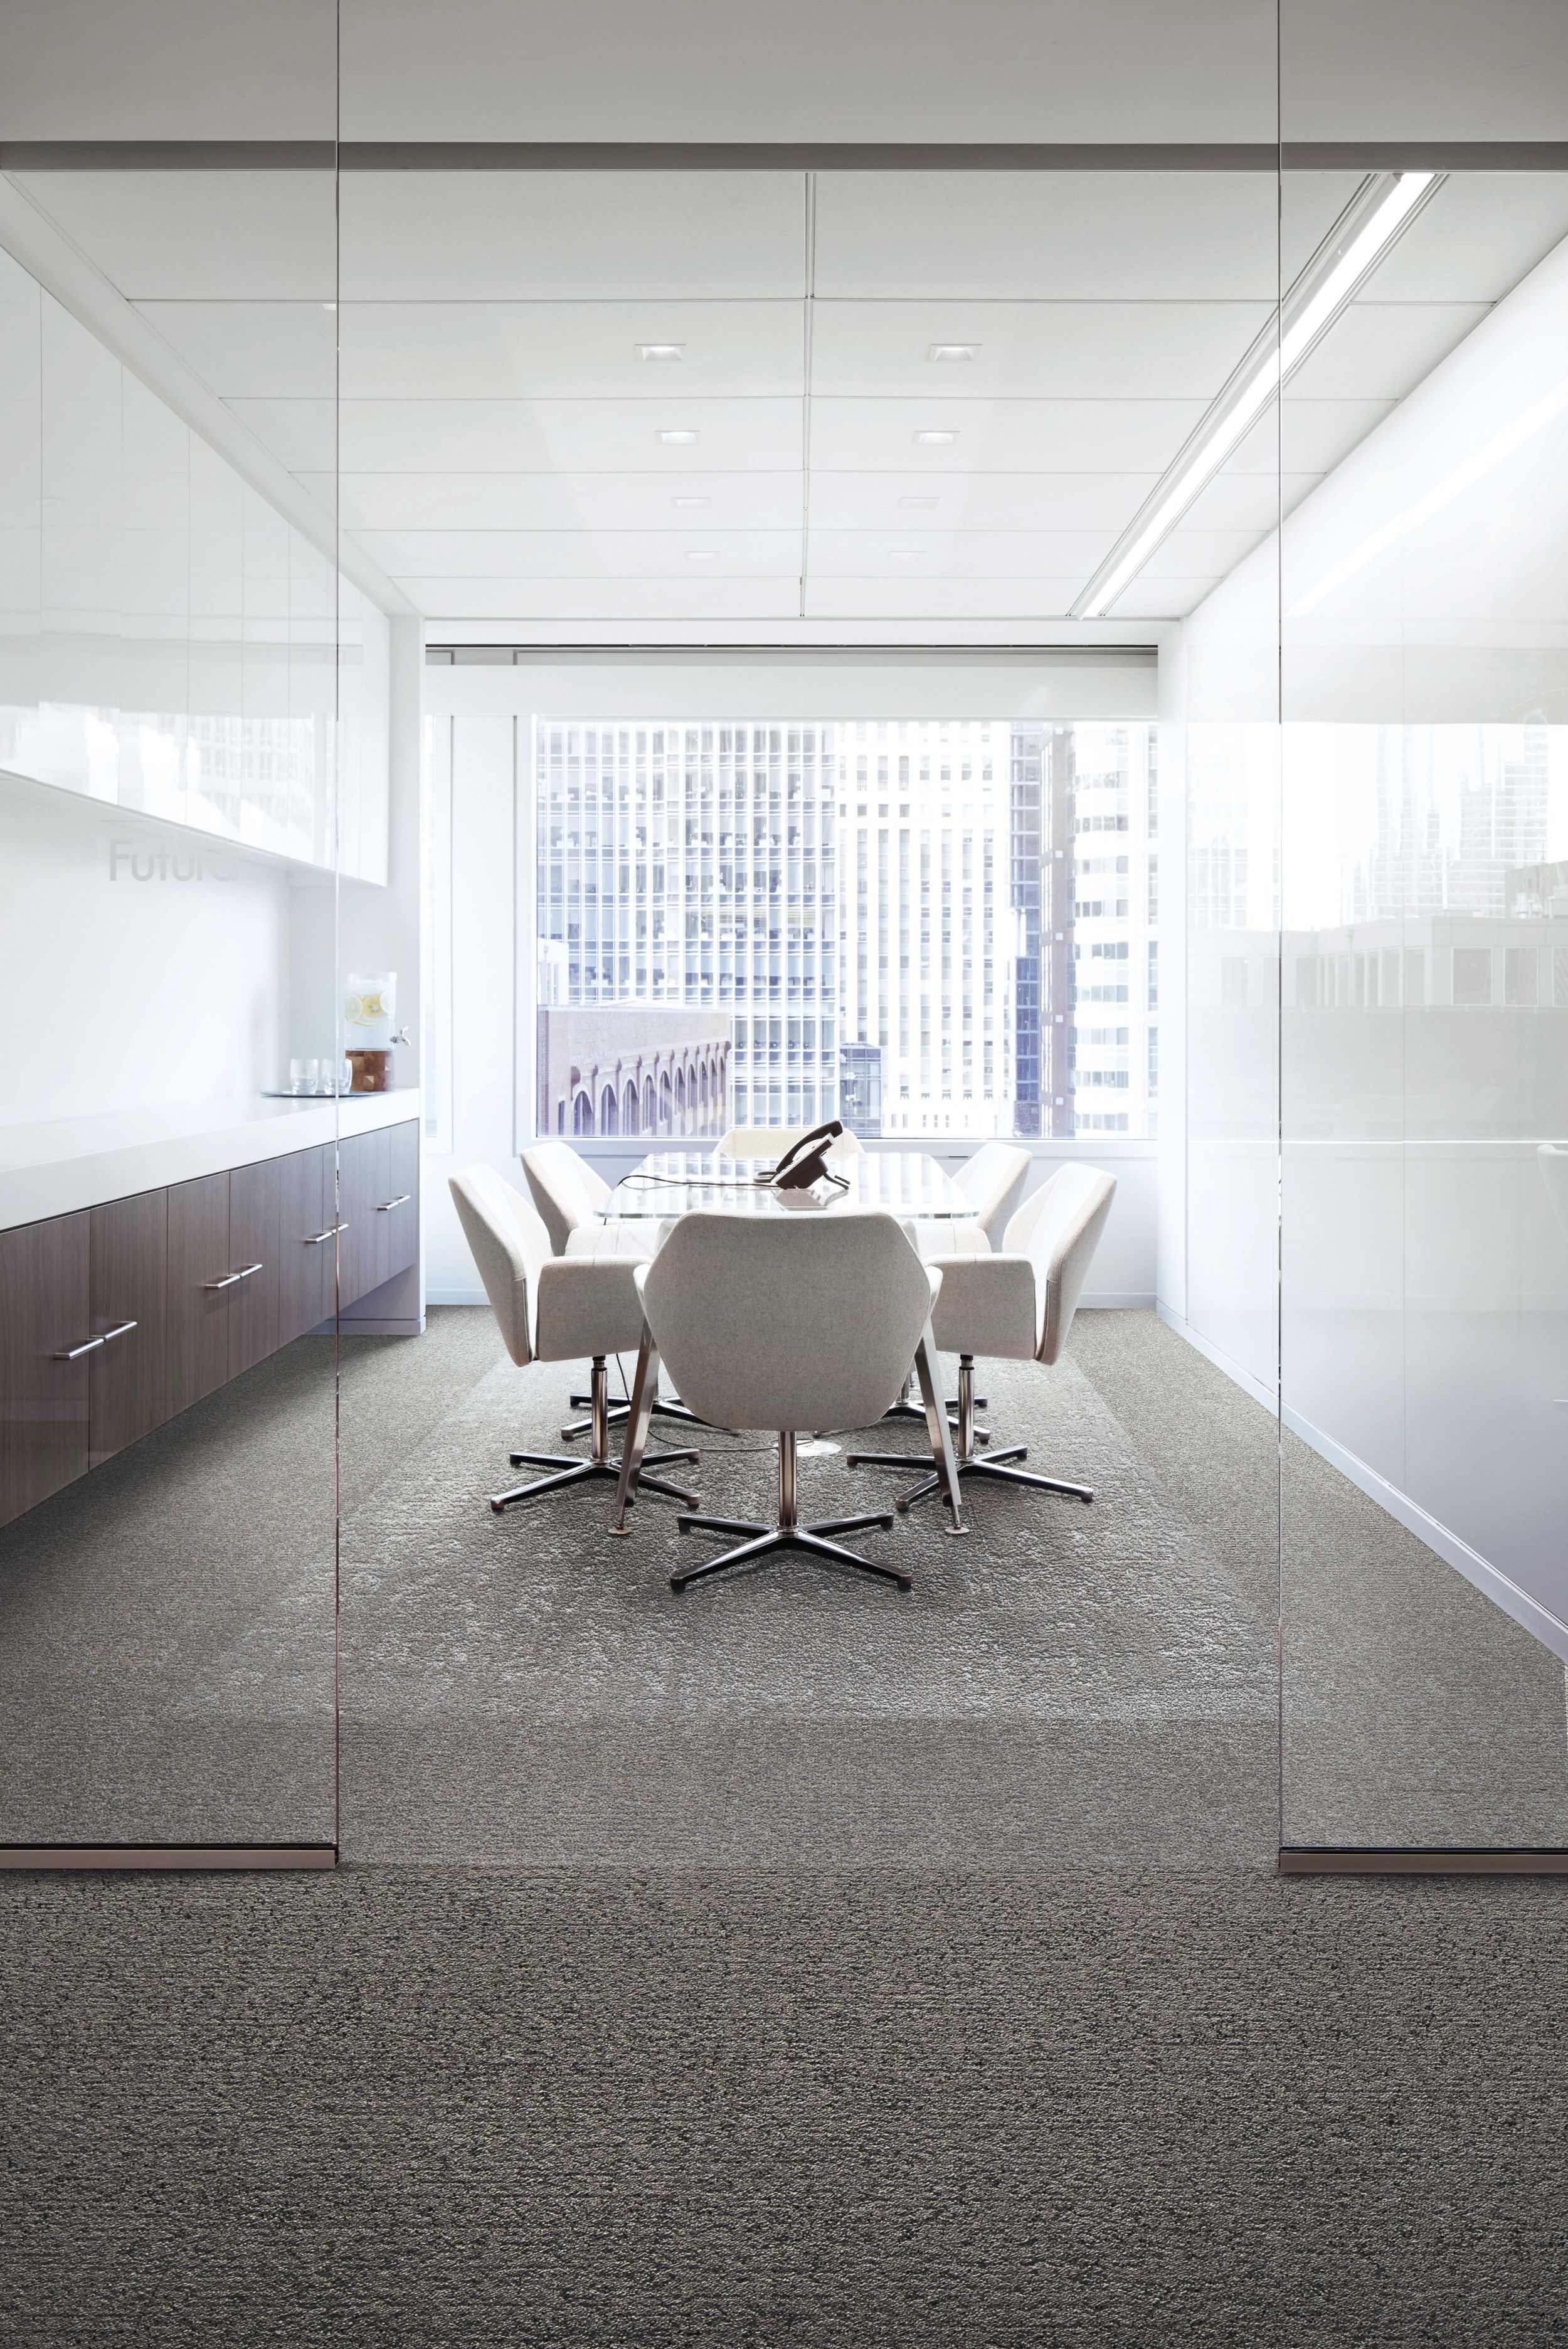 Interface Edge, Shed and Riverwalk carpet tiles in meeting room with glass door and office buildings in background window imagen número 10